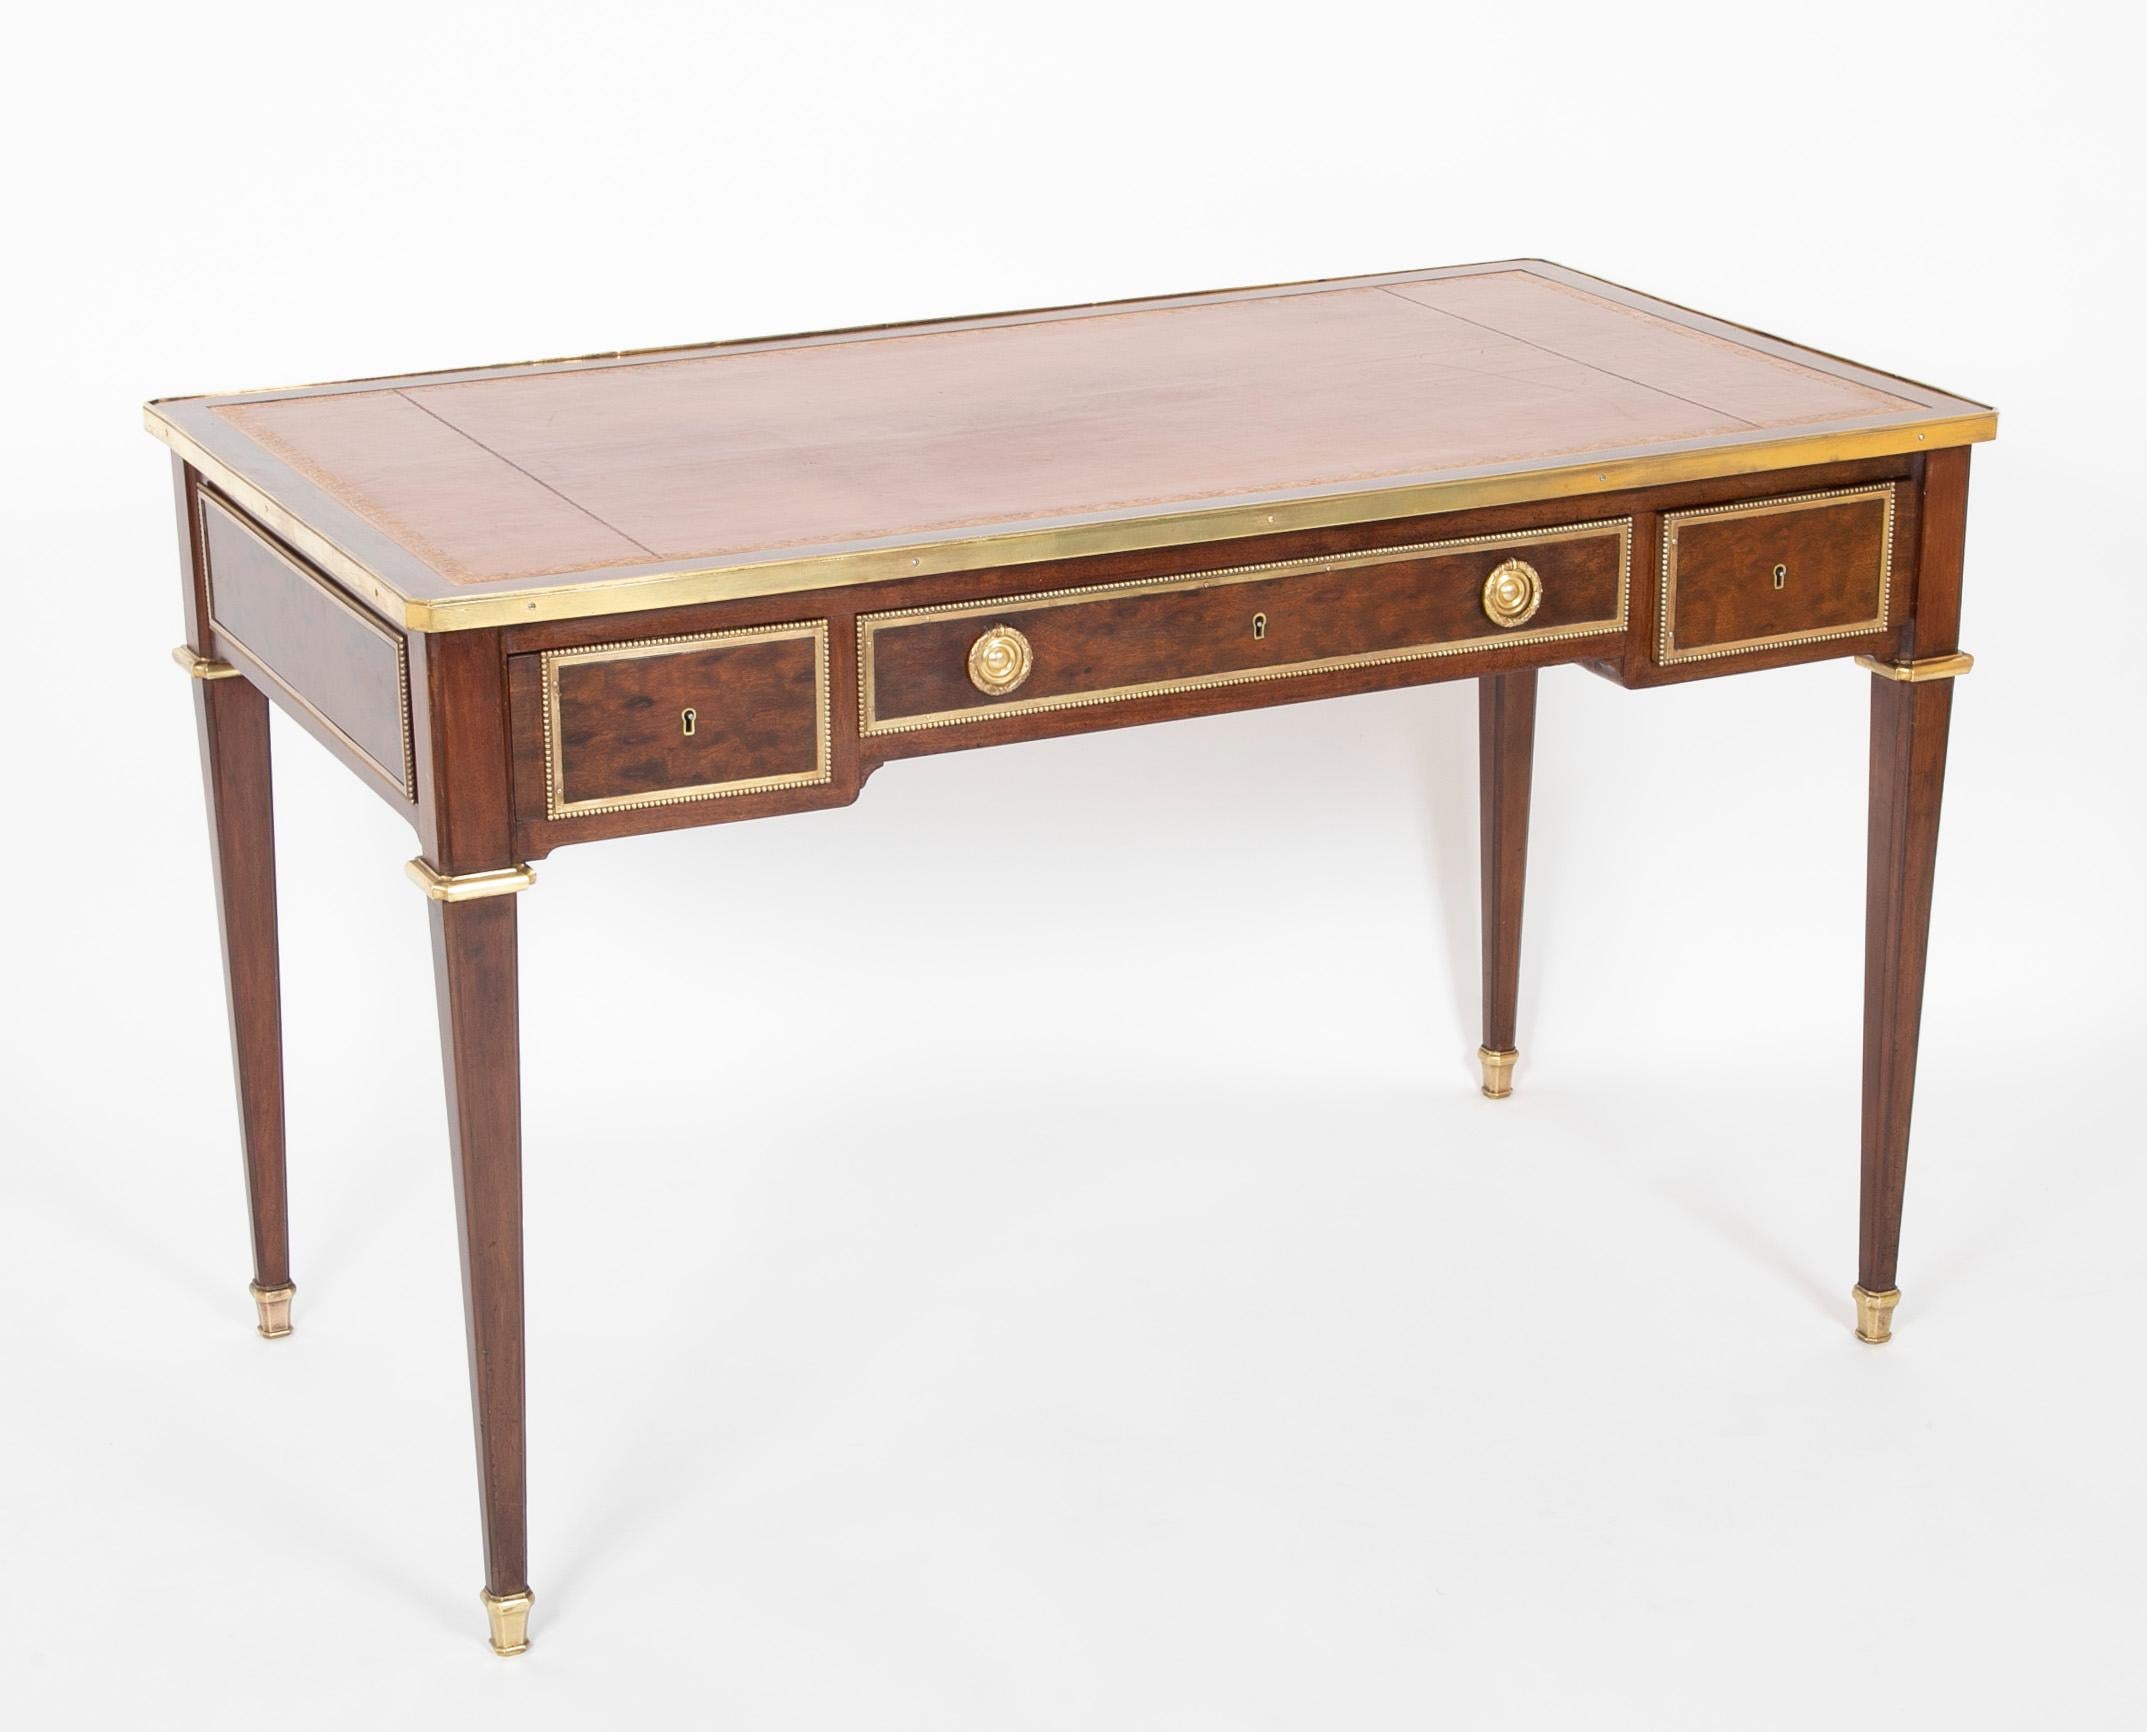 Mahogany and mahogany veneer rectangular flat desk opening to three drawers in front. Tapered legs chamfered on the corners. Finely chased and gilded bronze ornaments with rows of pearls underlining the mahogany panels, leather covered top, and